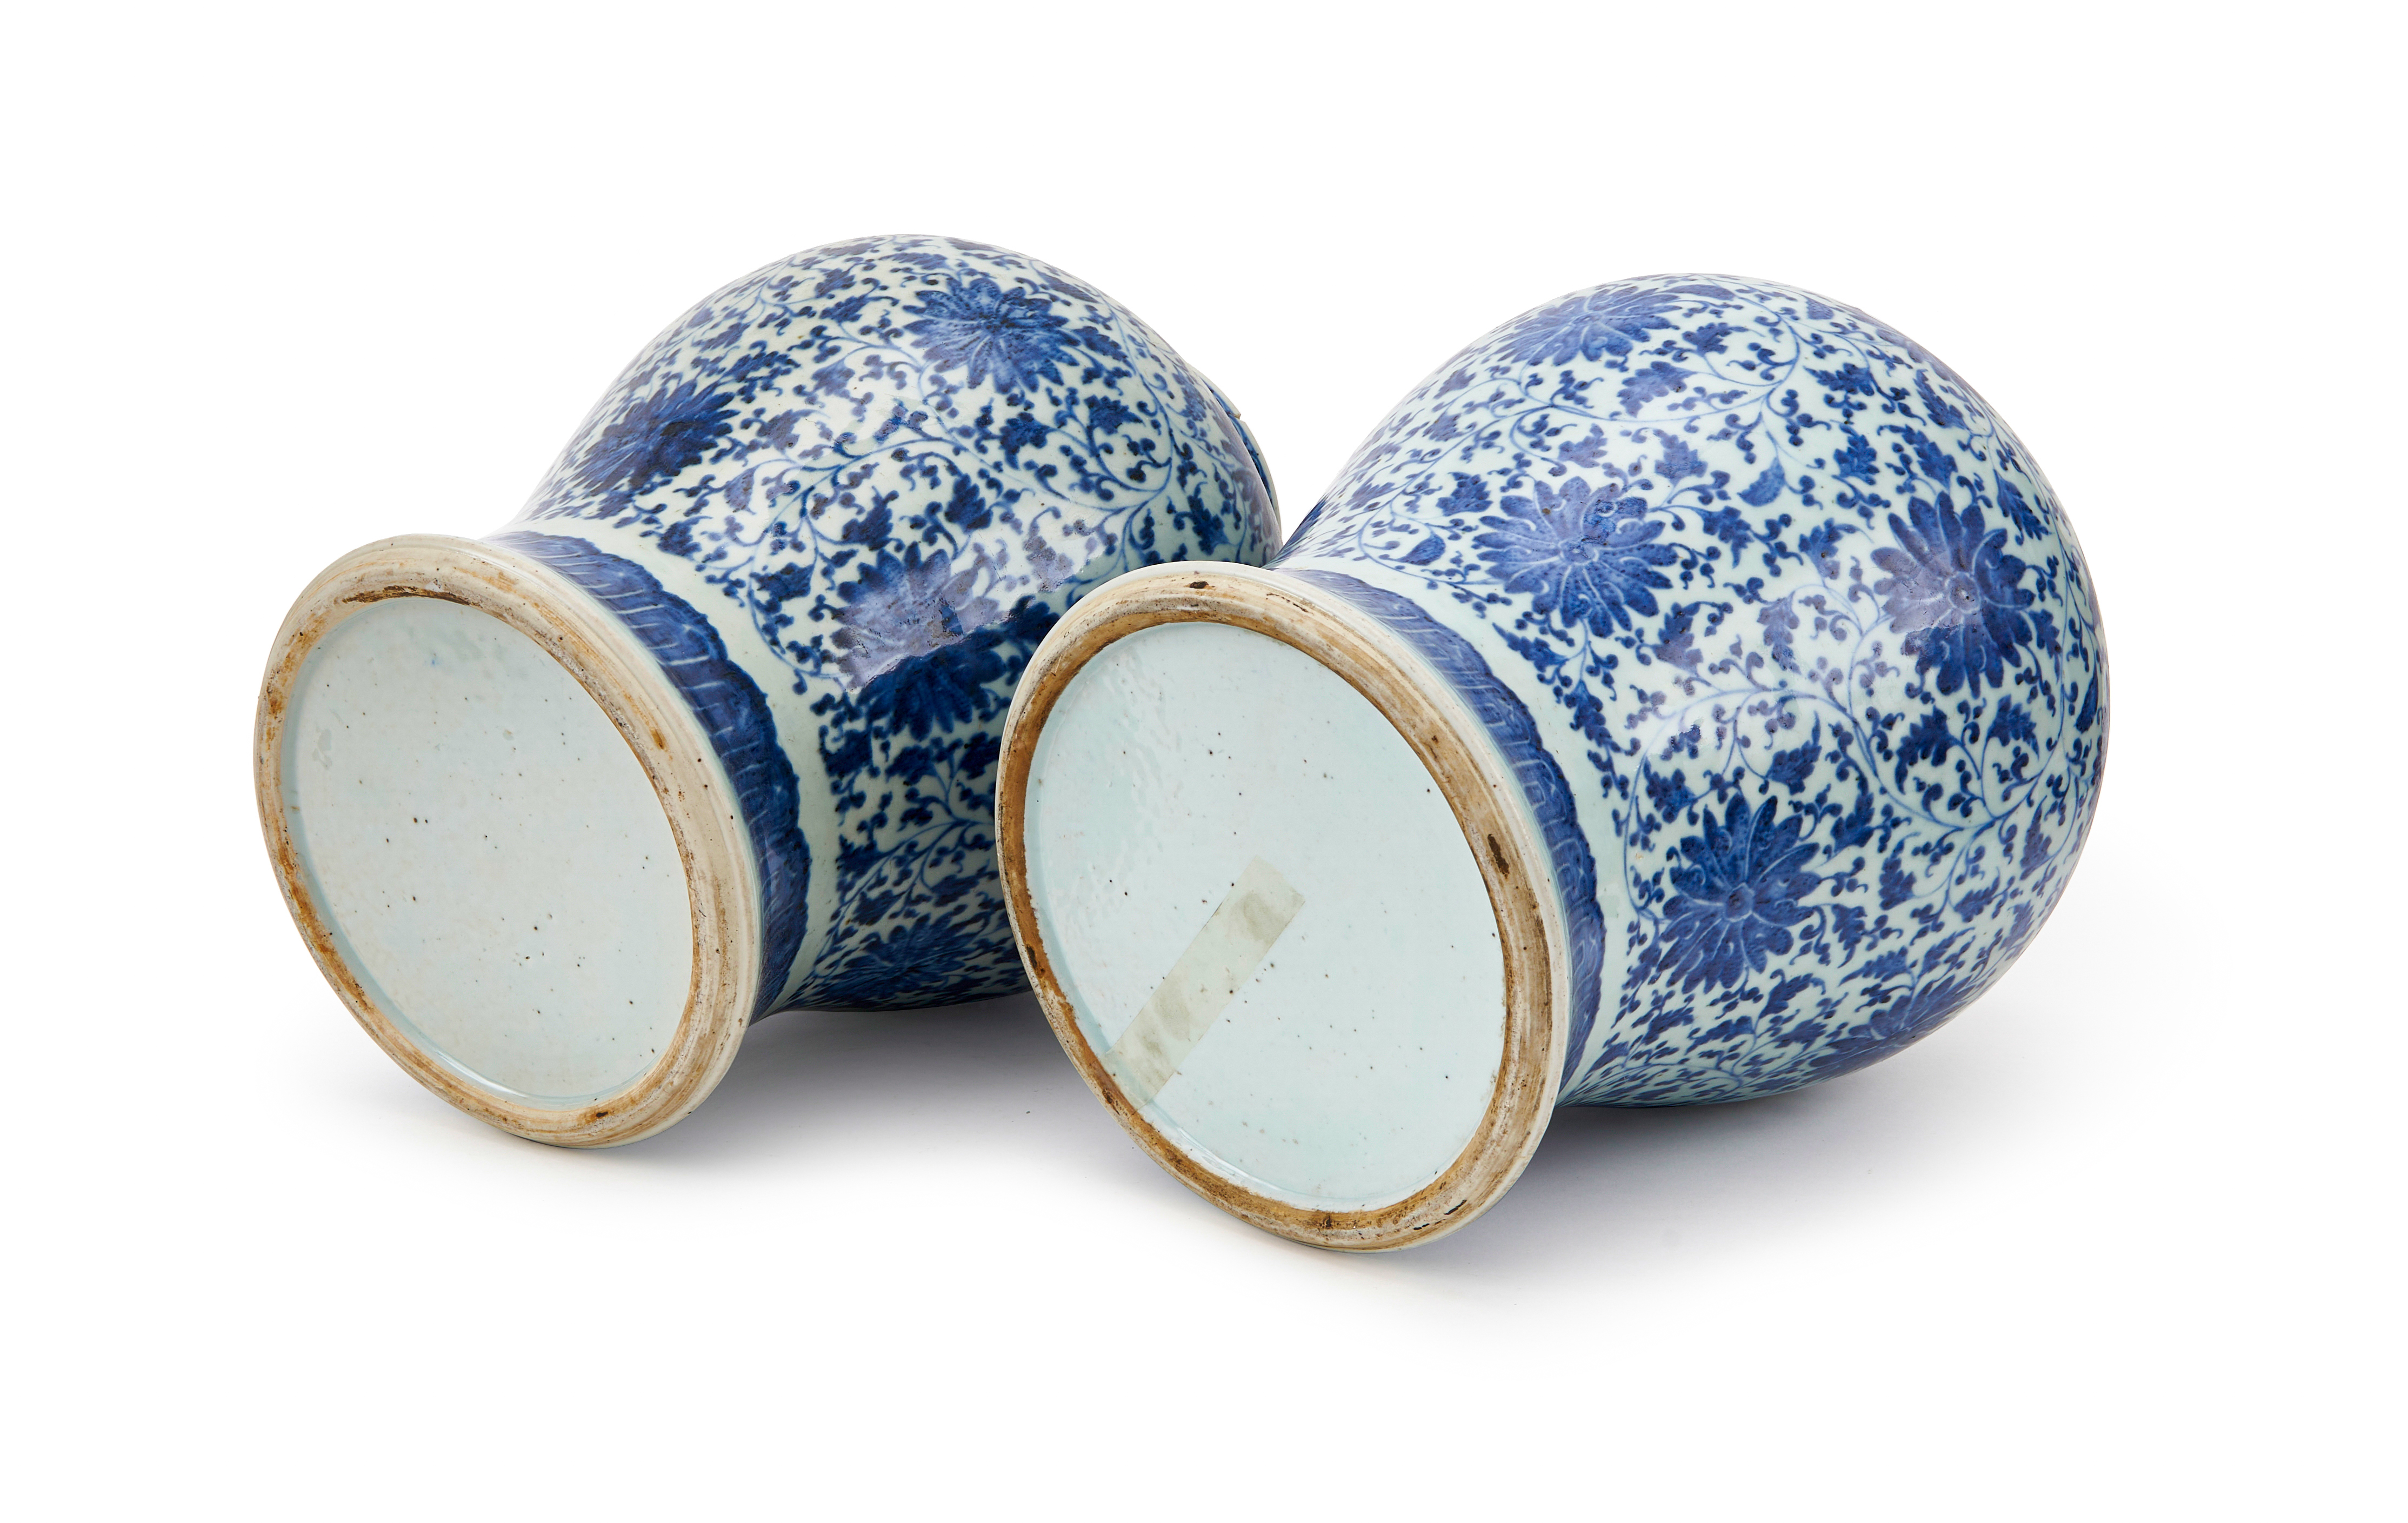 A PAIR OF BLUE & WHITE VASES, QING DYNASTY (1644-1911) - Image 3 of 3